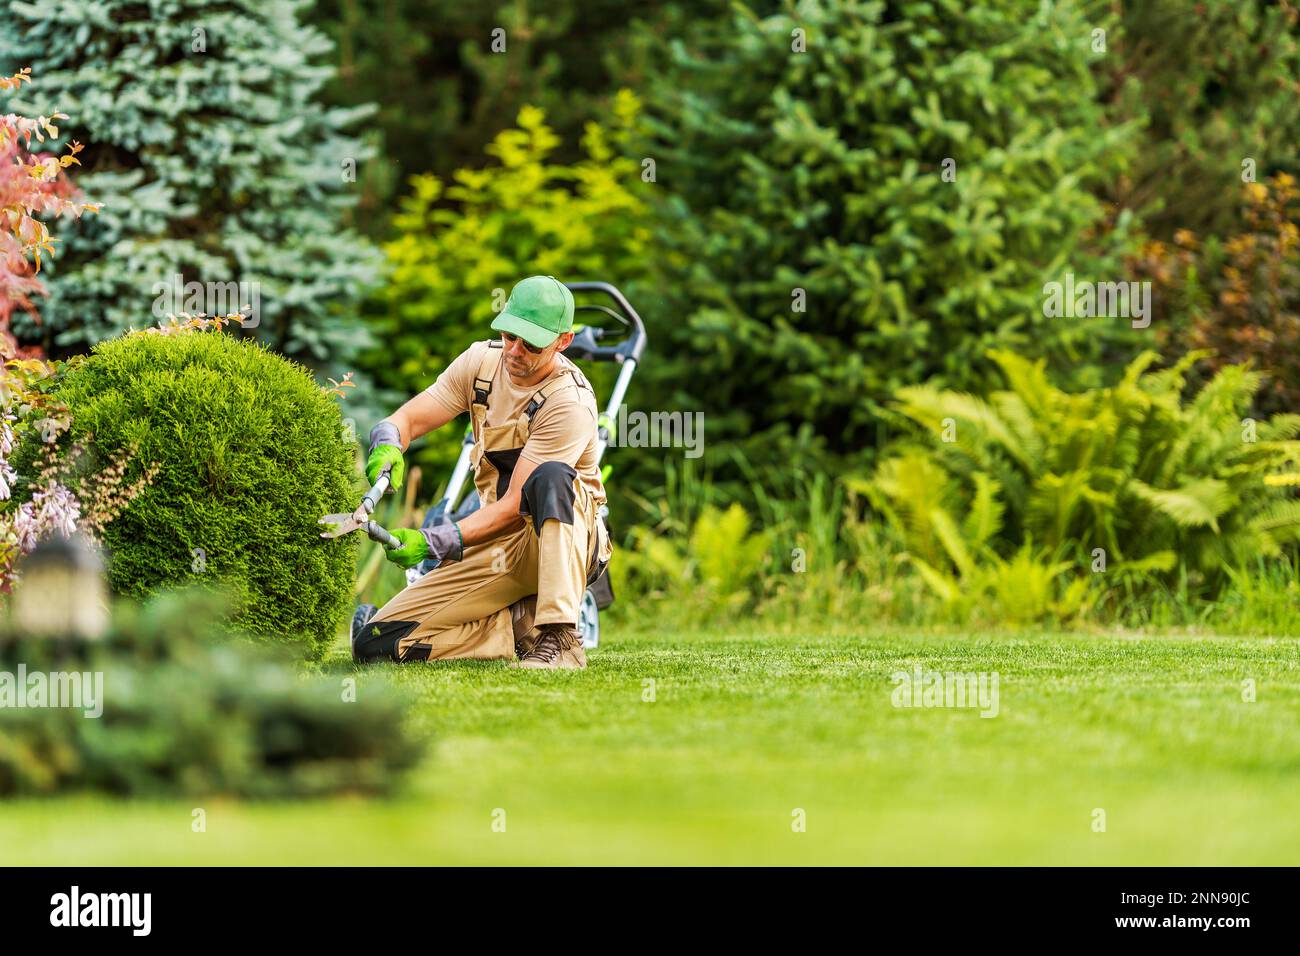 Professional Gardener Shaping Green Shrub with Garden Scissors During Landscape Maintenance Work. Blurred Background with Copy Space. Stock Photo